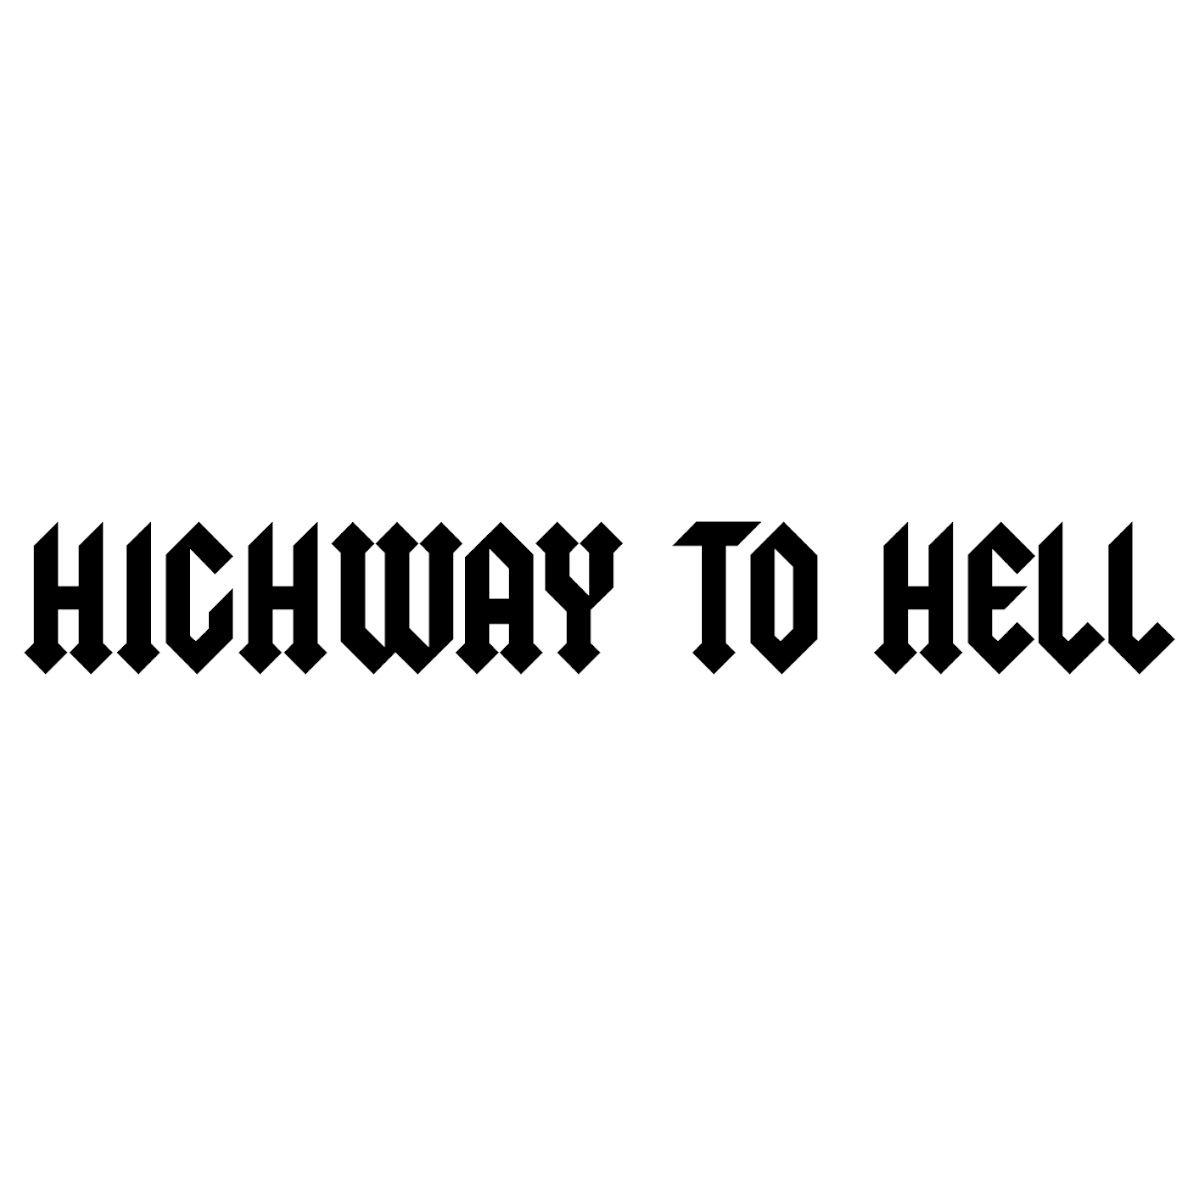 Dekal - Highway to hell